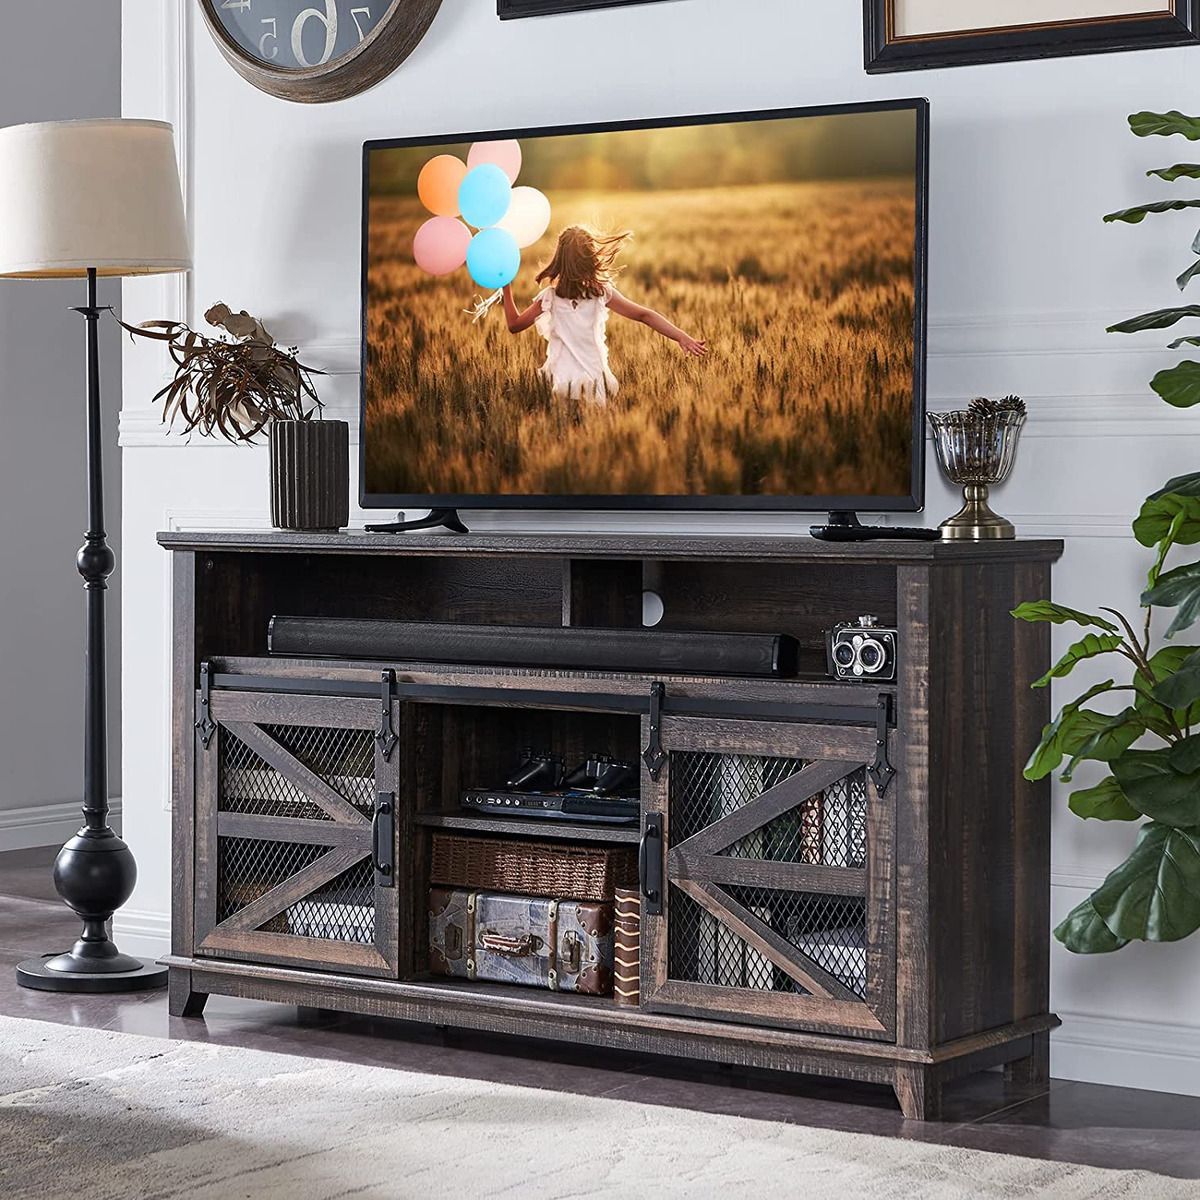 Farmhouse Tv Stand For 65+ Inch Tv, Industrial & Farmhouse Media  Entertainment C | Ebay Pertaining To Farmhouse Media Entertainment Centers (View 2 of 20)